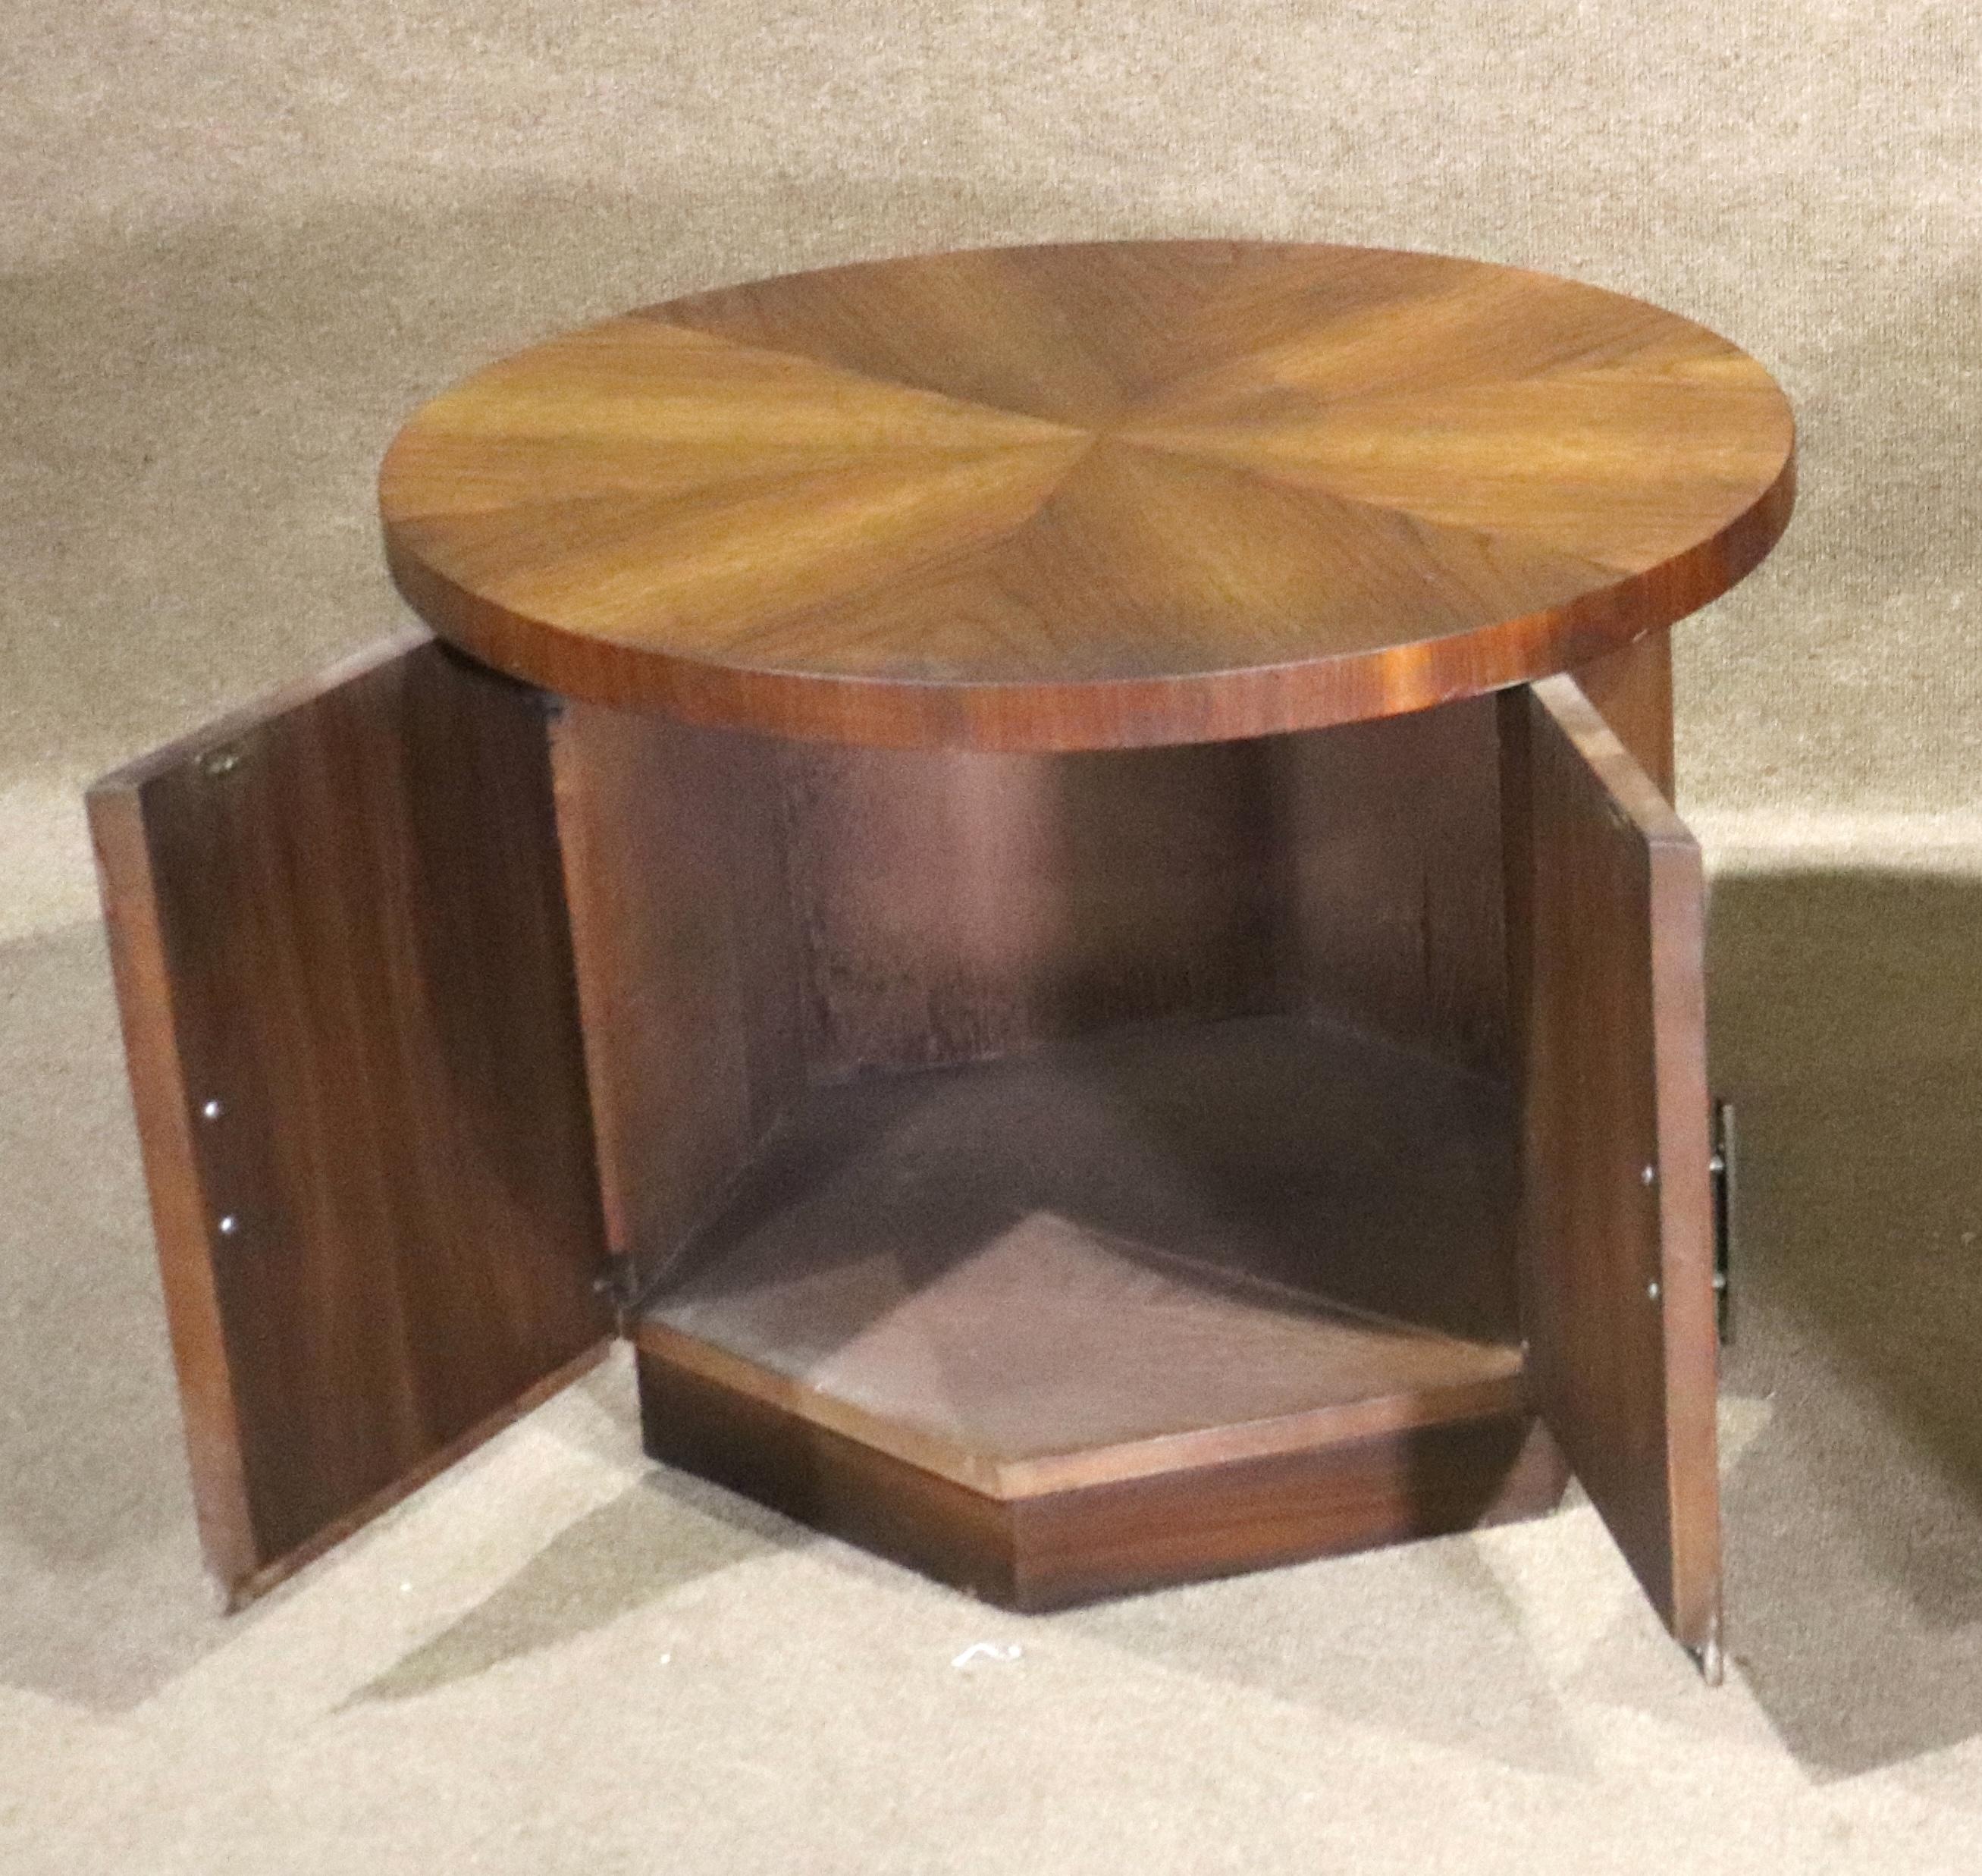 Round top pedestal table by Lane Furniture. Two door storage cabinet with beautiful walnut grain top.
Please confirm location NY or NJ